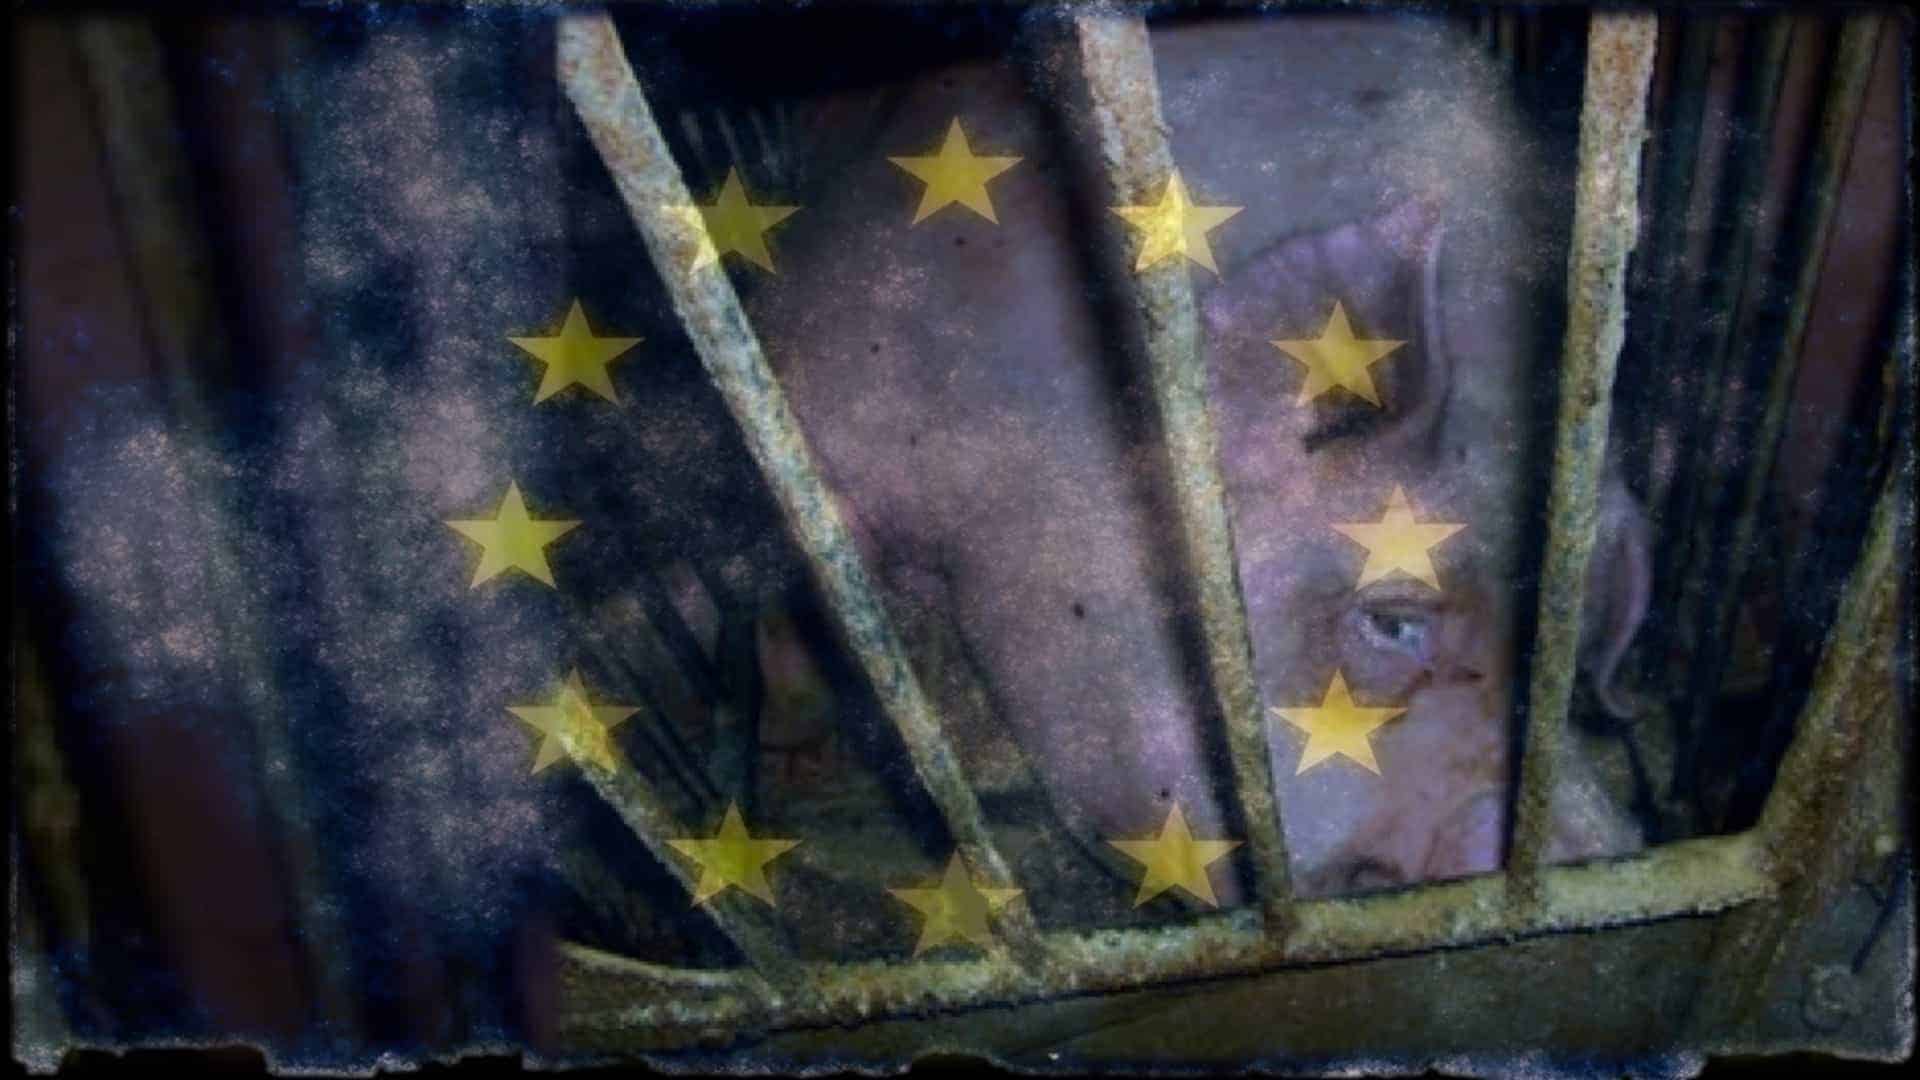 A pig looks forlornly towards the camera. It is on its side, held in a tiny metal cage. Overlaying the image is the flag of the European Union.